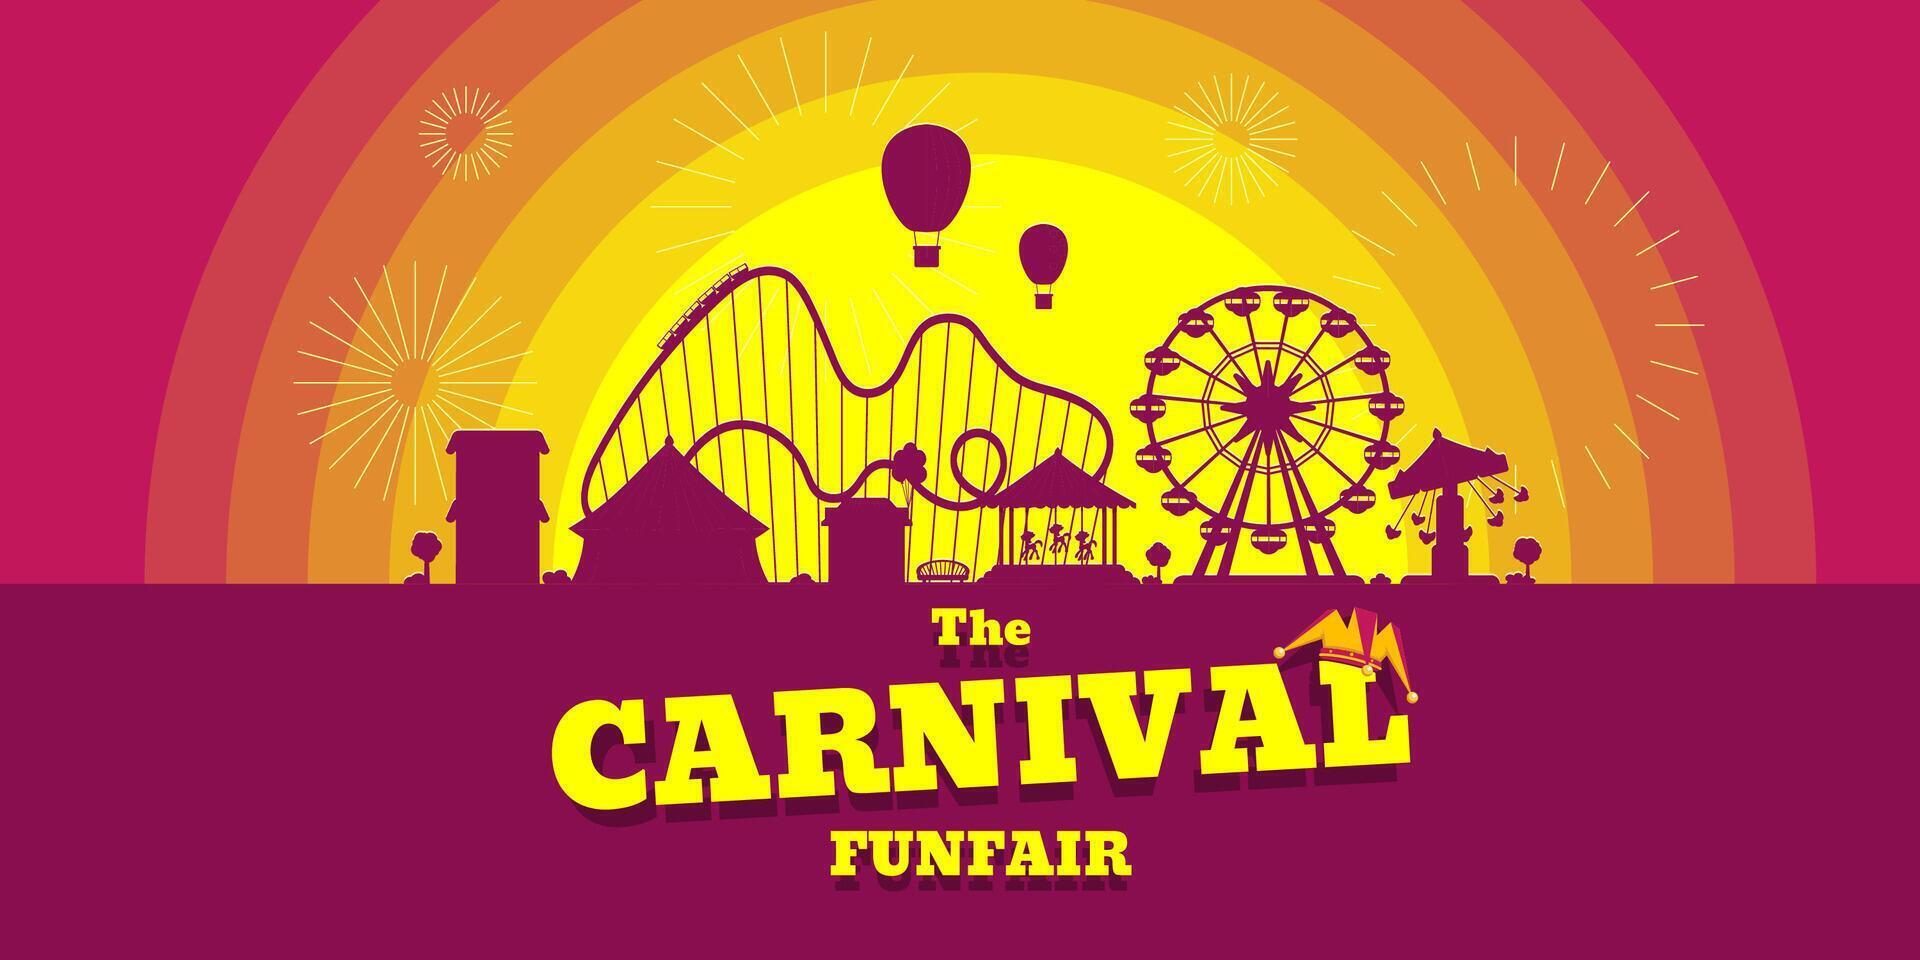 Carnival funfair horizontal banner. Amusement park with circus, carousels, roller coaster, attractions on sunset background. Fun fair landscape with fireworks. Ferris wheel and merry-go-round festival vector